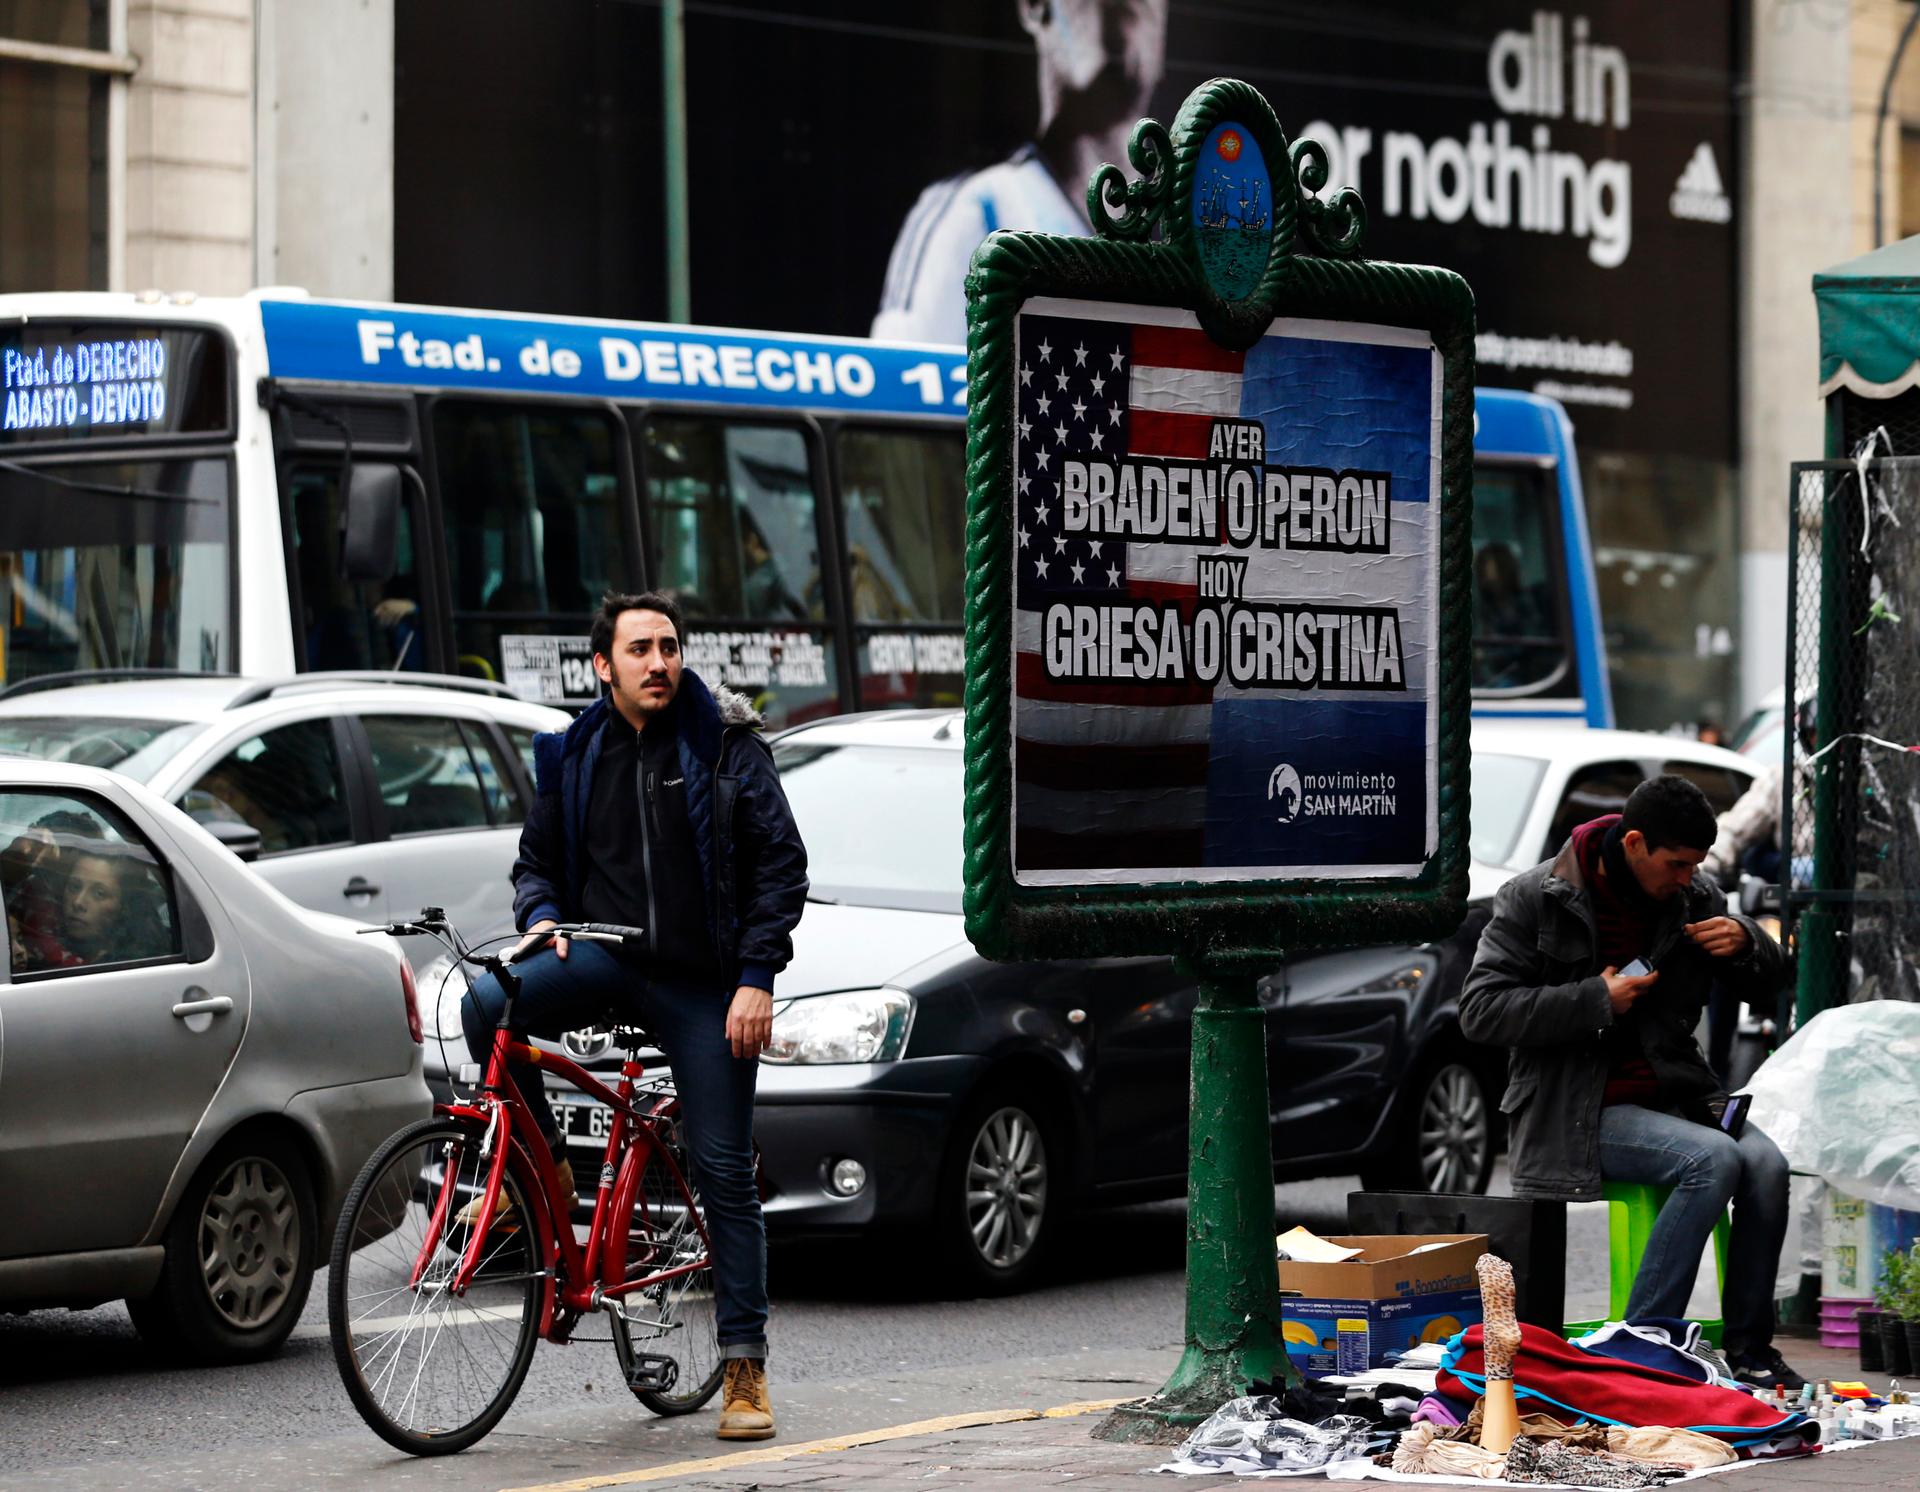 A man looks at a poster placed on an advertising board that reads "Yesterday, Braden or Peron - Today: Griesa or Cristina", in Buenos Aires on July 29, 2014. Argentine debt negotiators held talks in New York on Tuesday with the U.S. mediator in the South 